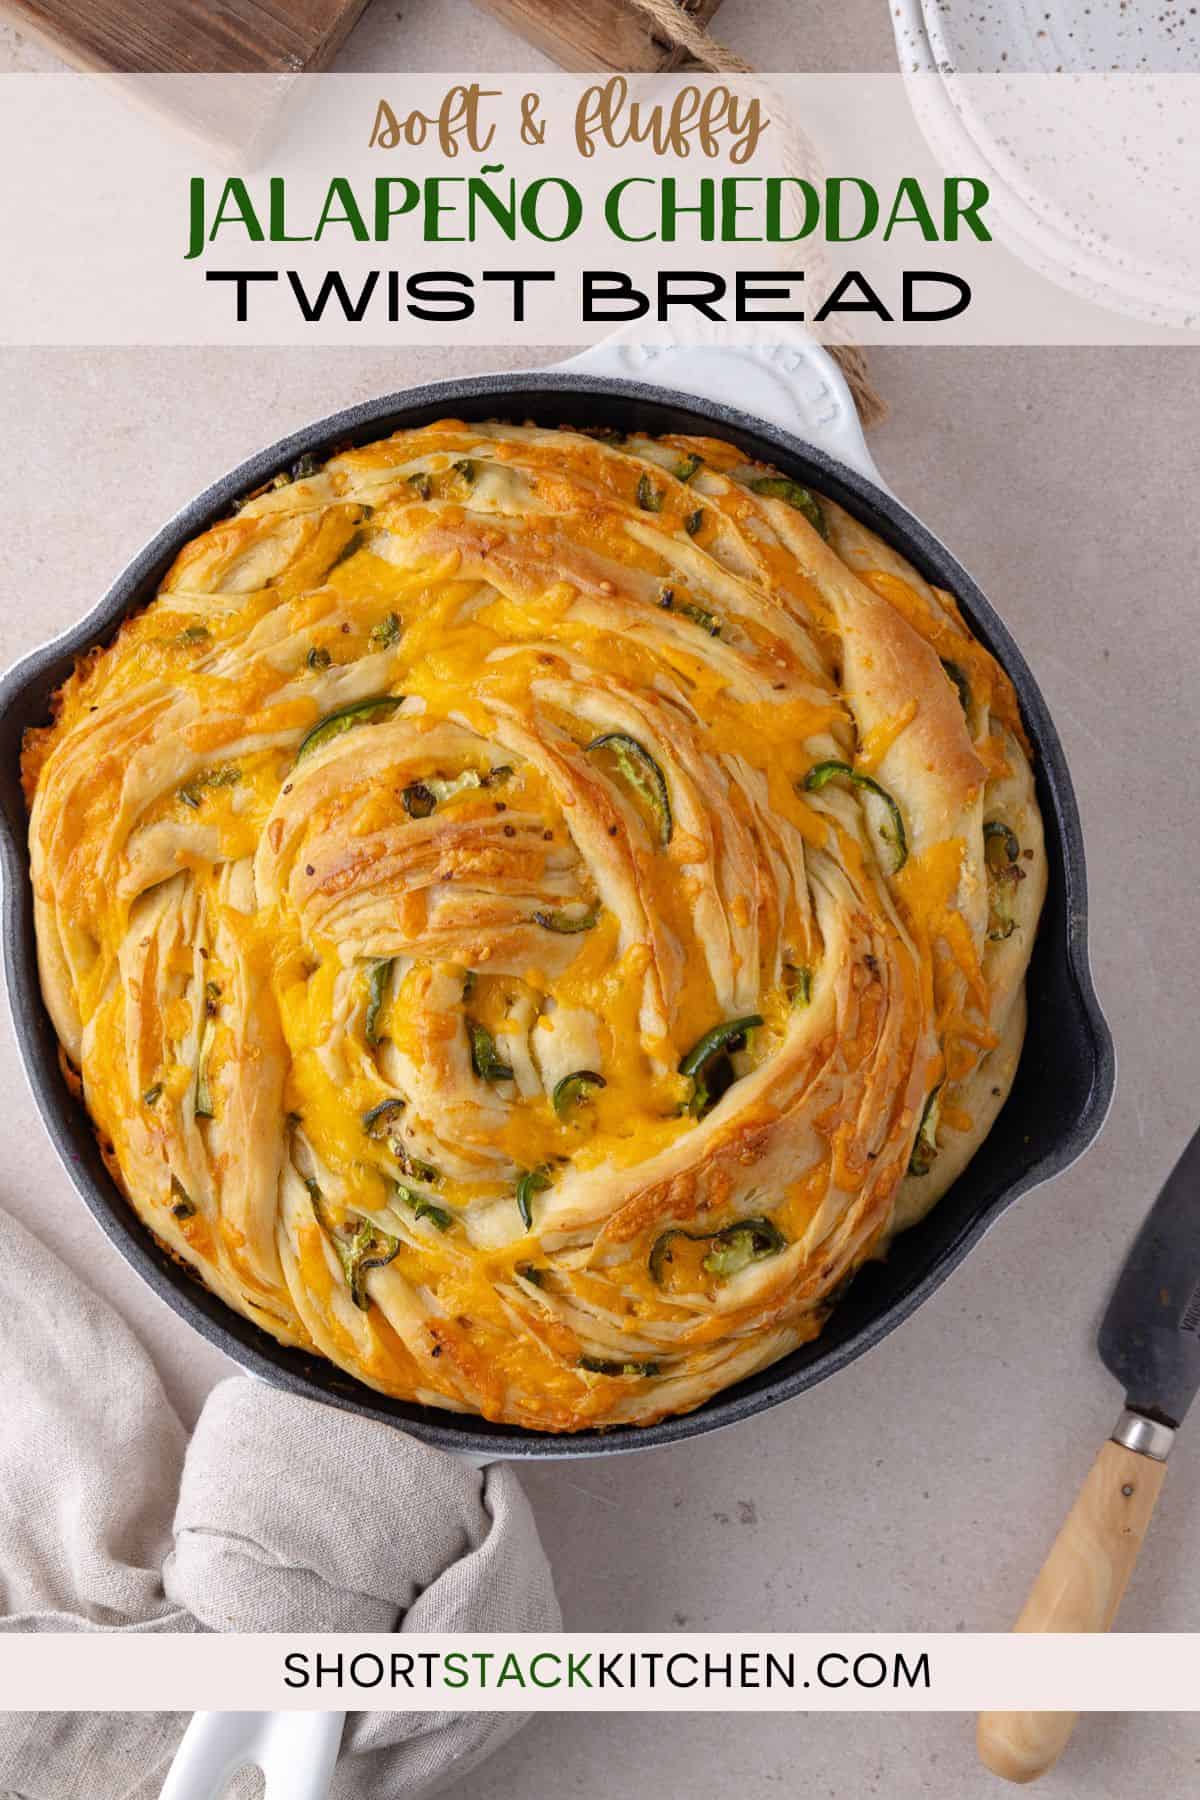 Jalapeno cheddar bread photo for pinterest.